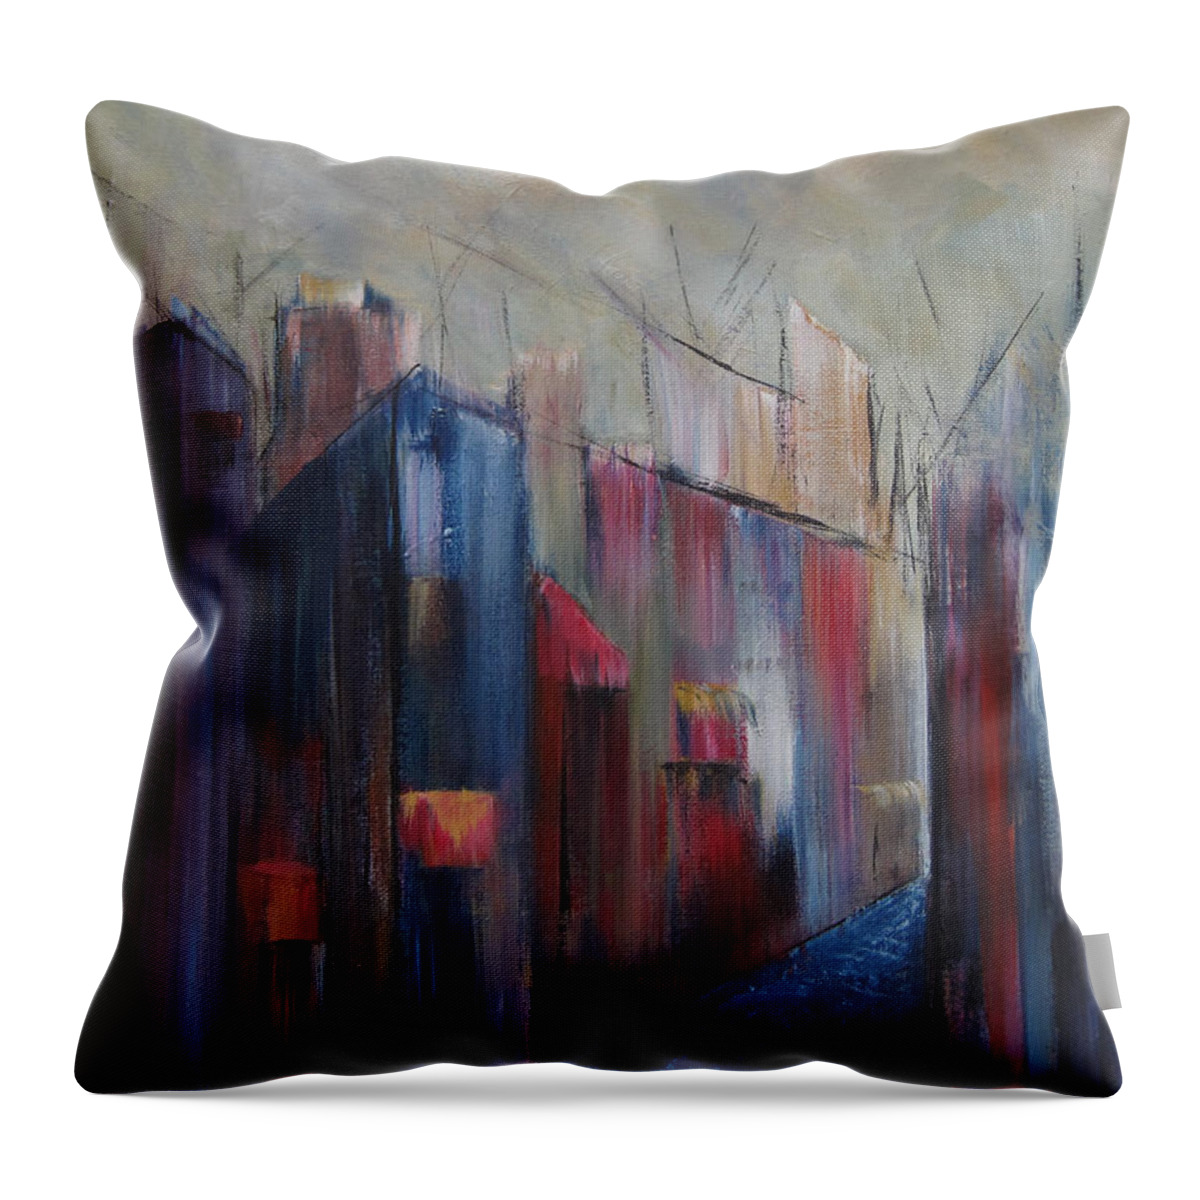 Abstract Throw Pillow featuring the painting Port's Passage by Roberta Rotunda